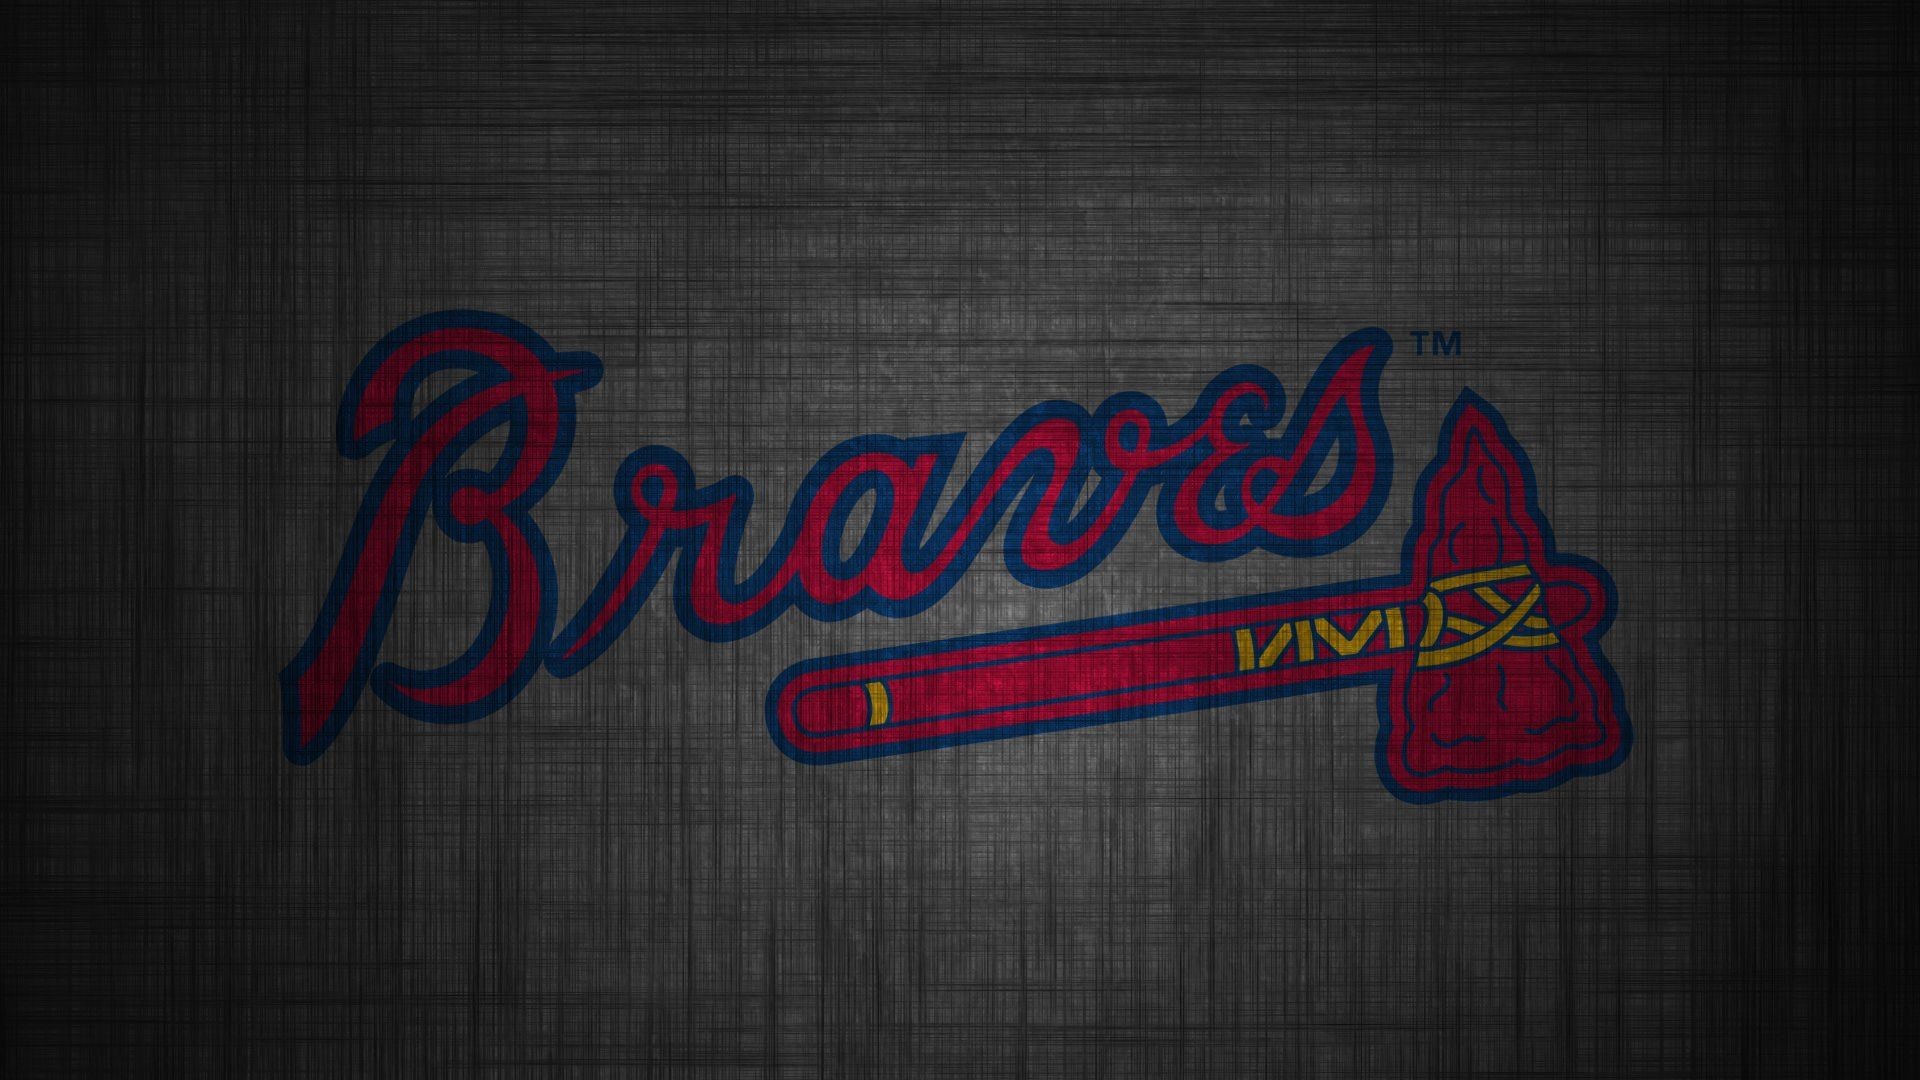 Wallpapers Atlanta Braves With high-resolution 1920X1080 pixel. You can use this wallpaper for Mac Desktop Wallpaper, Laptop Screensavers, Android Wallpapers, Tablet or iPhone Home Screen and another mobile phone device